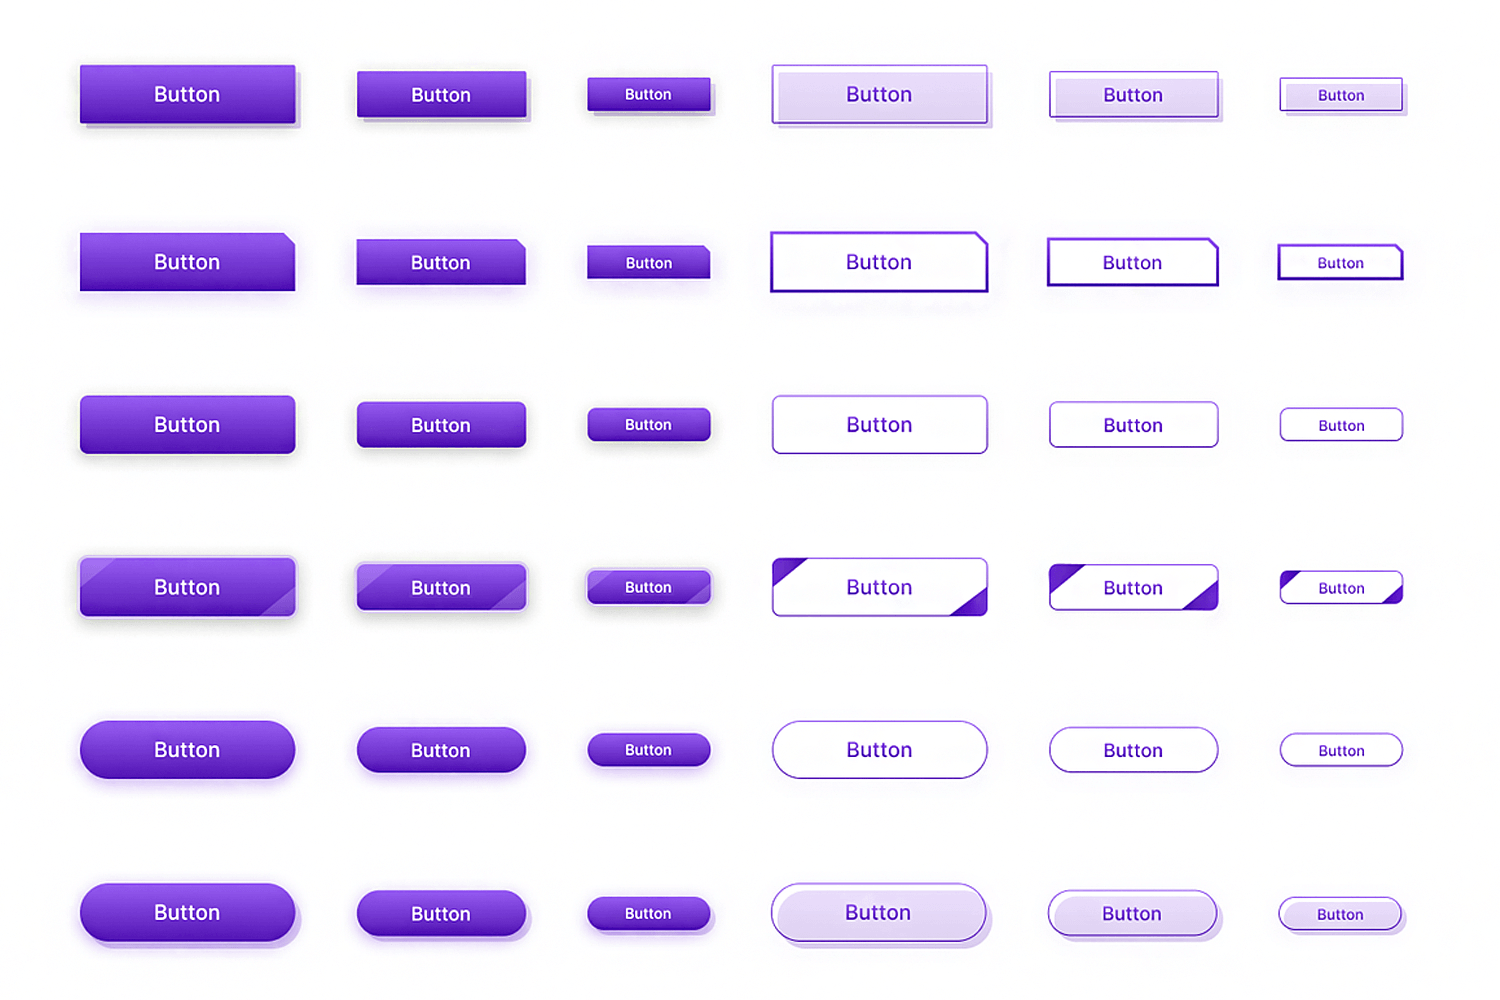 UI button design examples with various shapes and styles